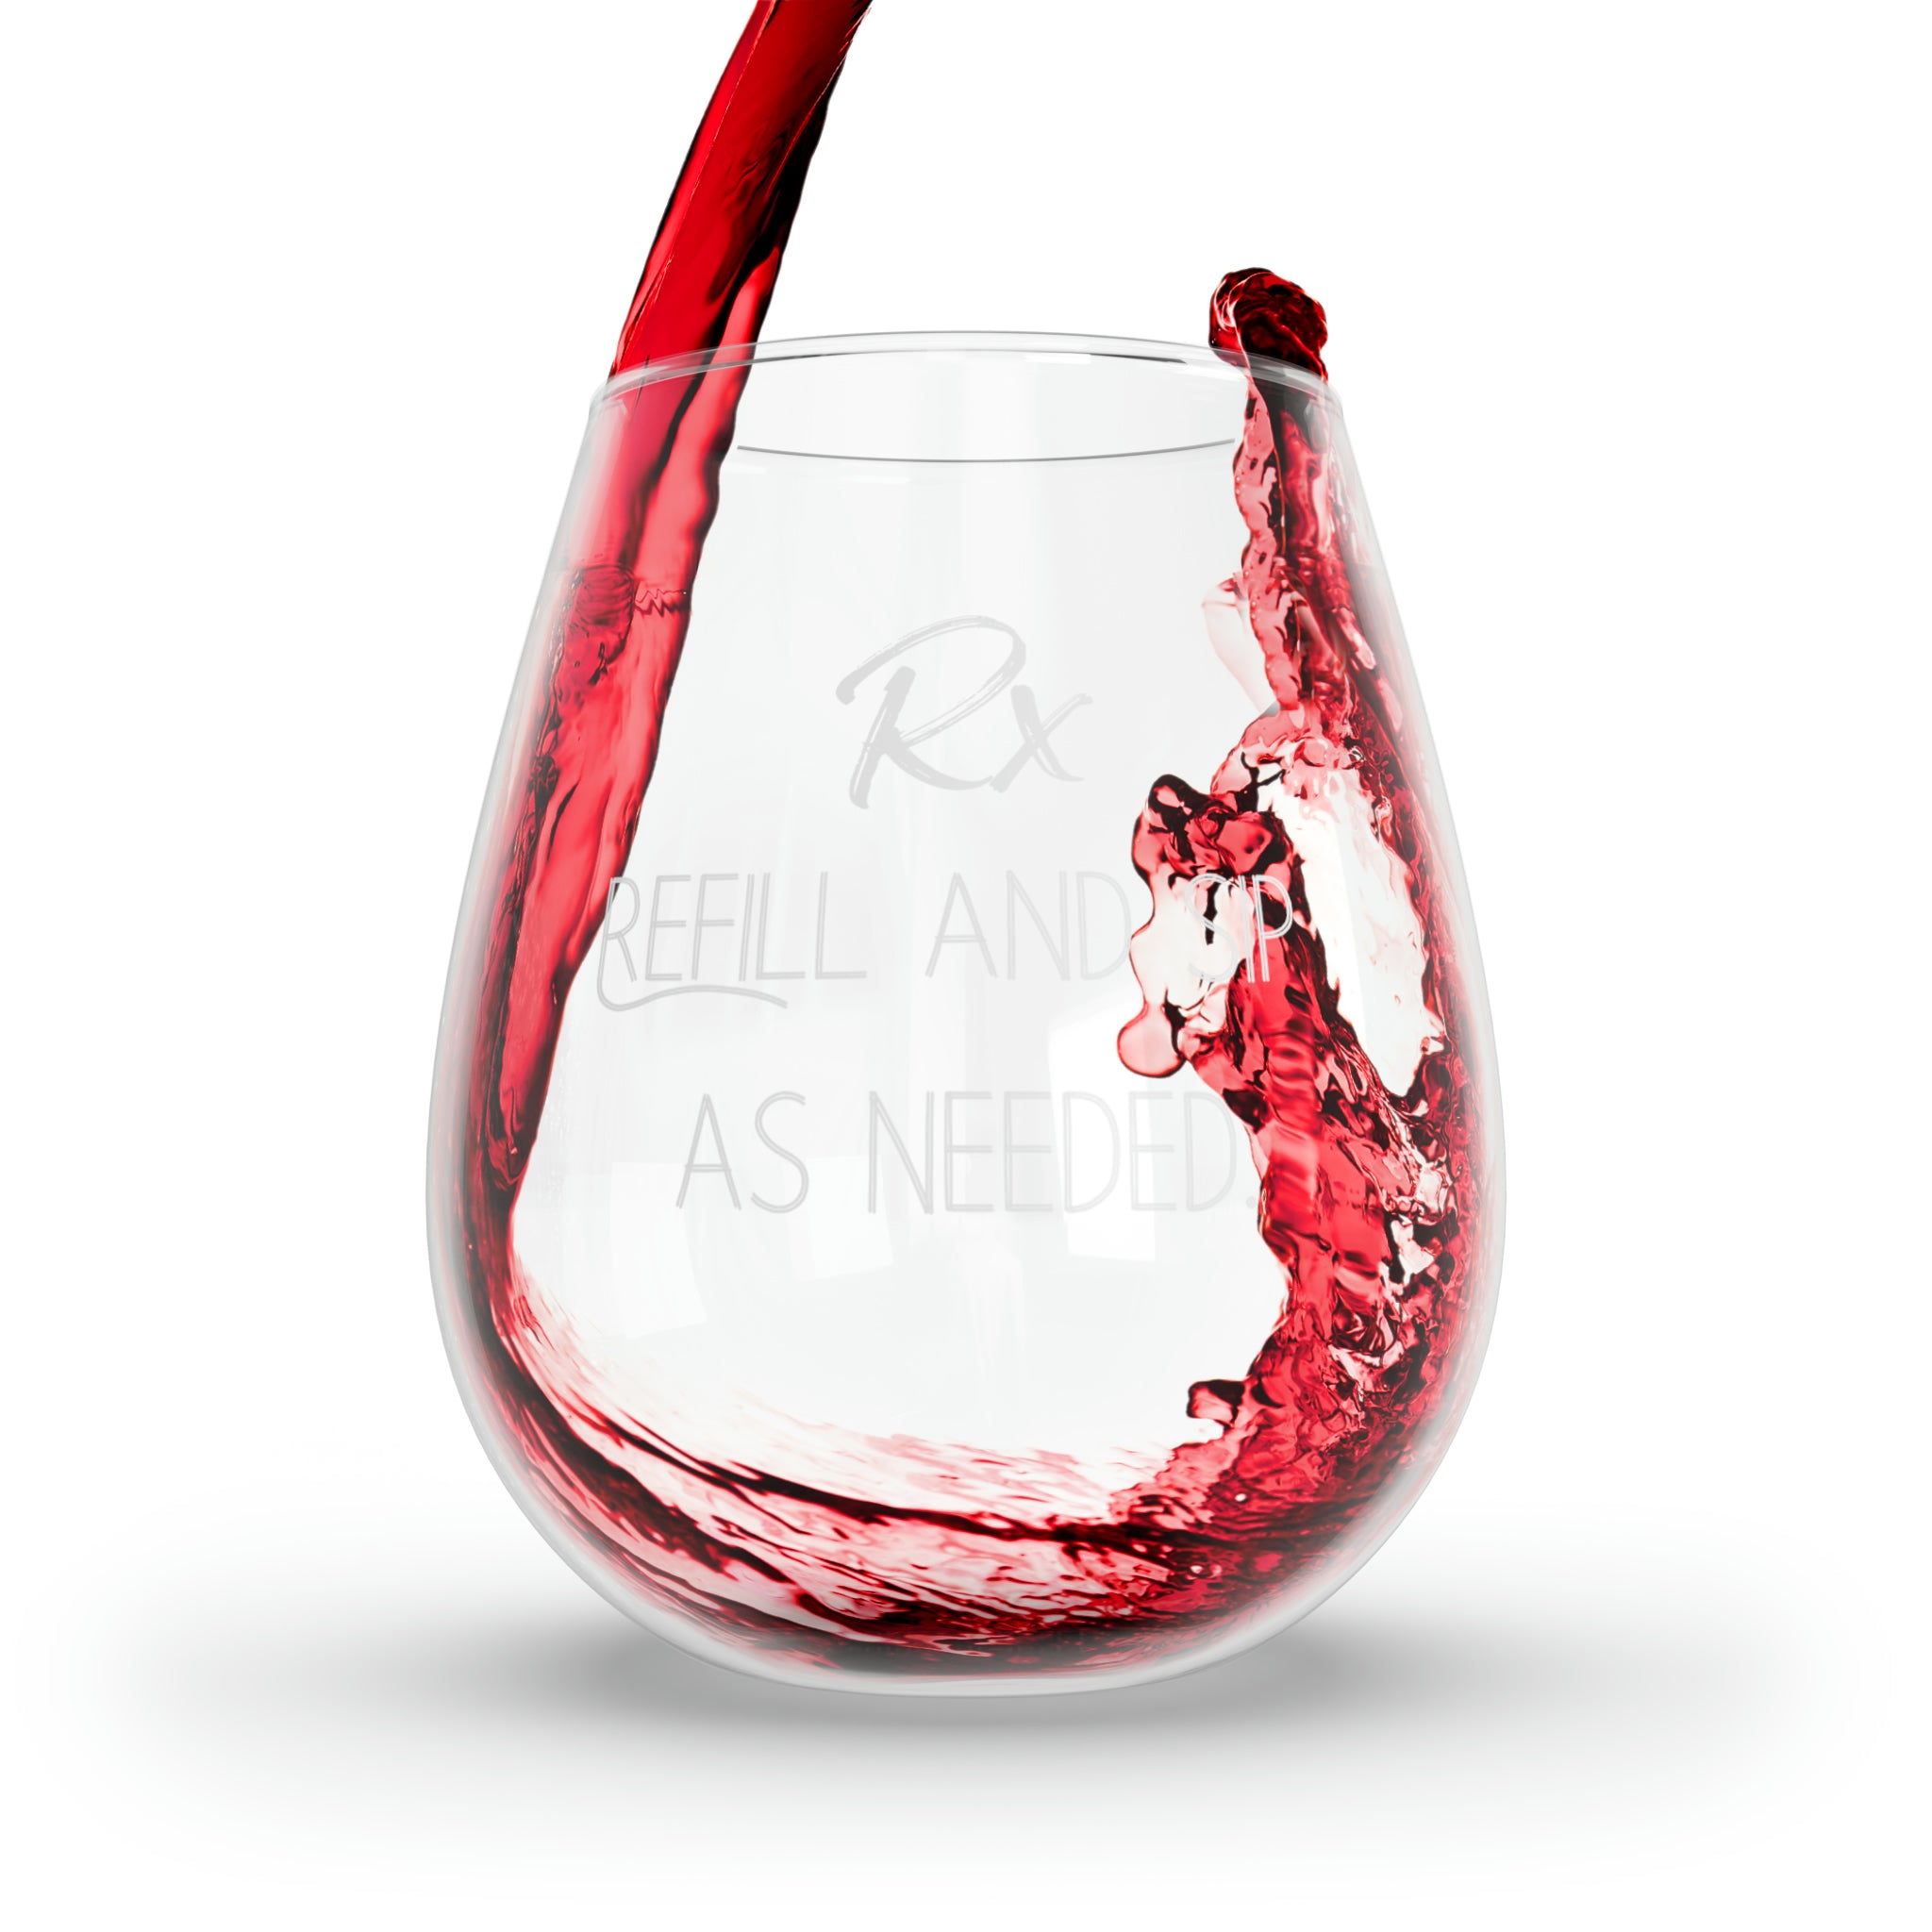 Refill and Sip - Stemless Wine Glass, 11.75oz